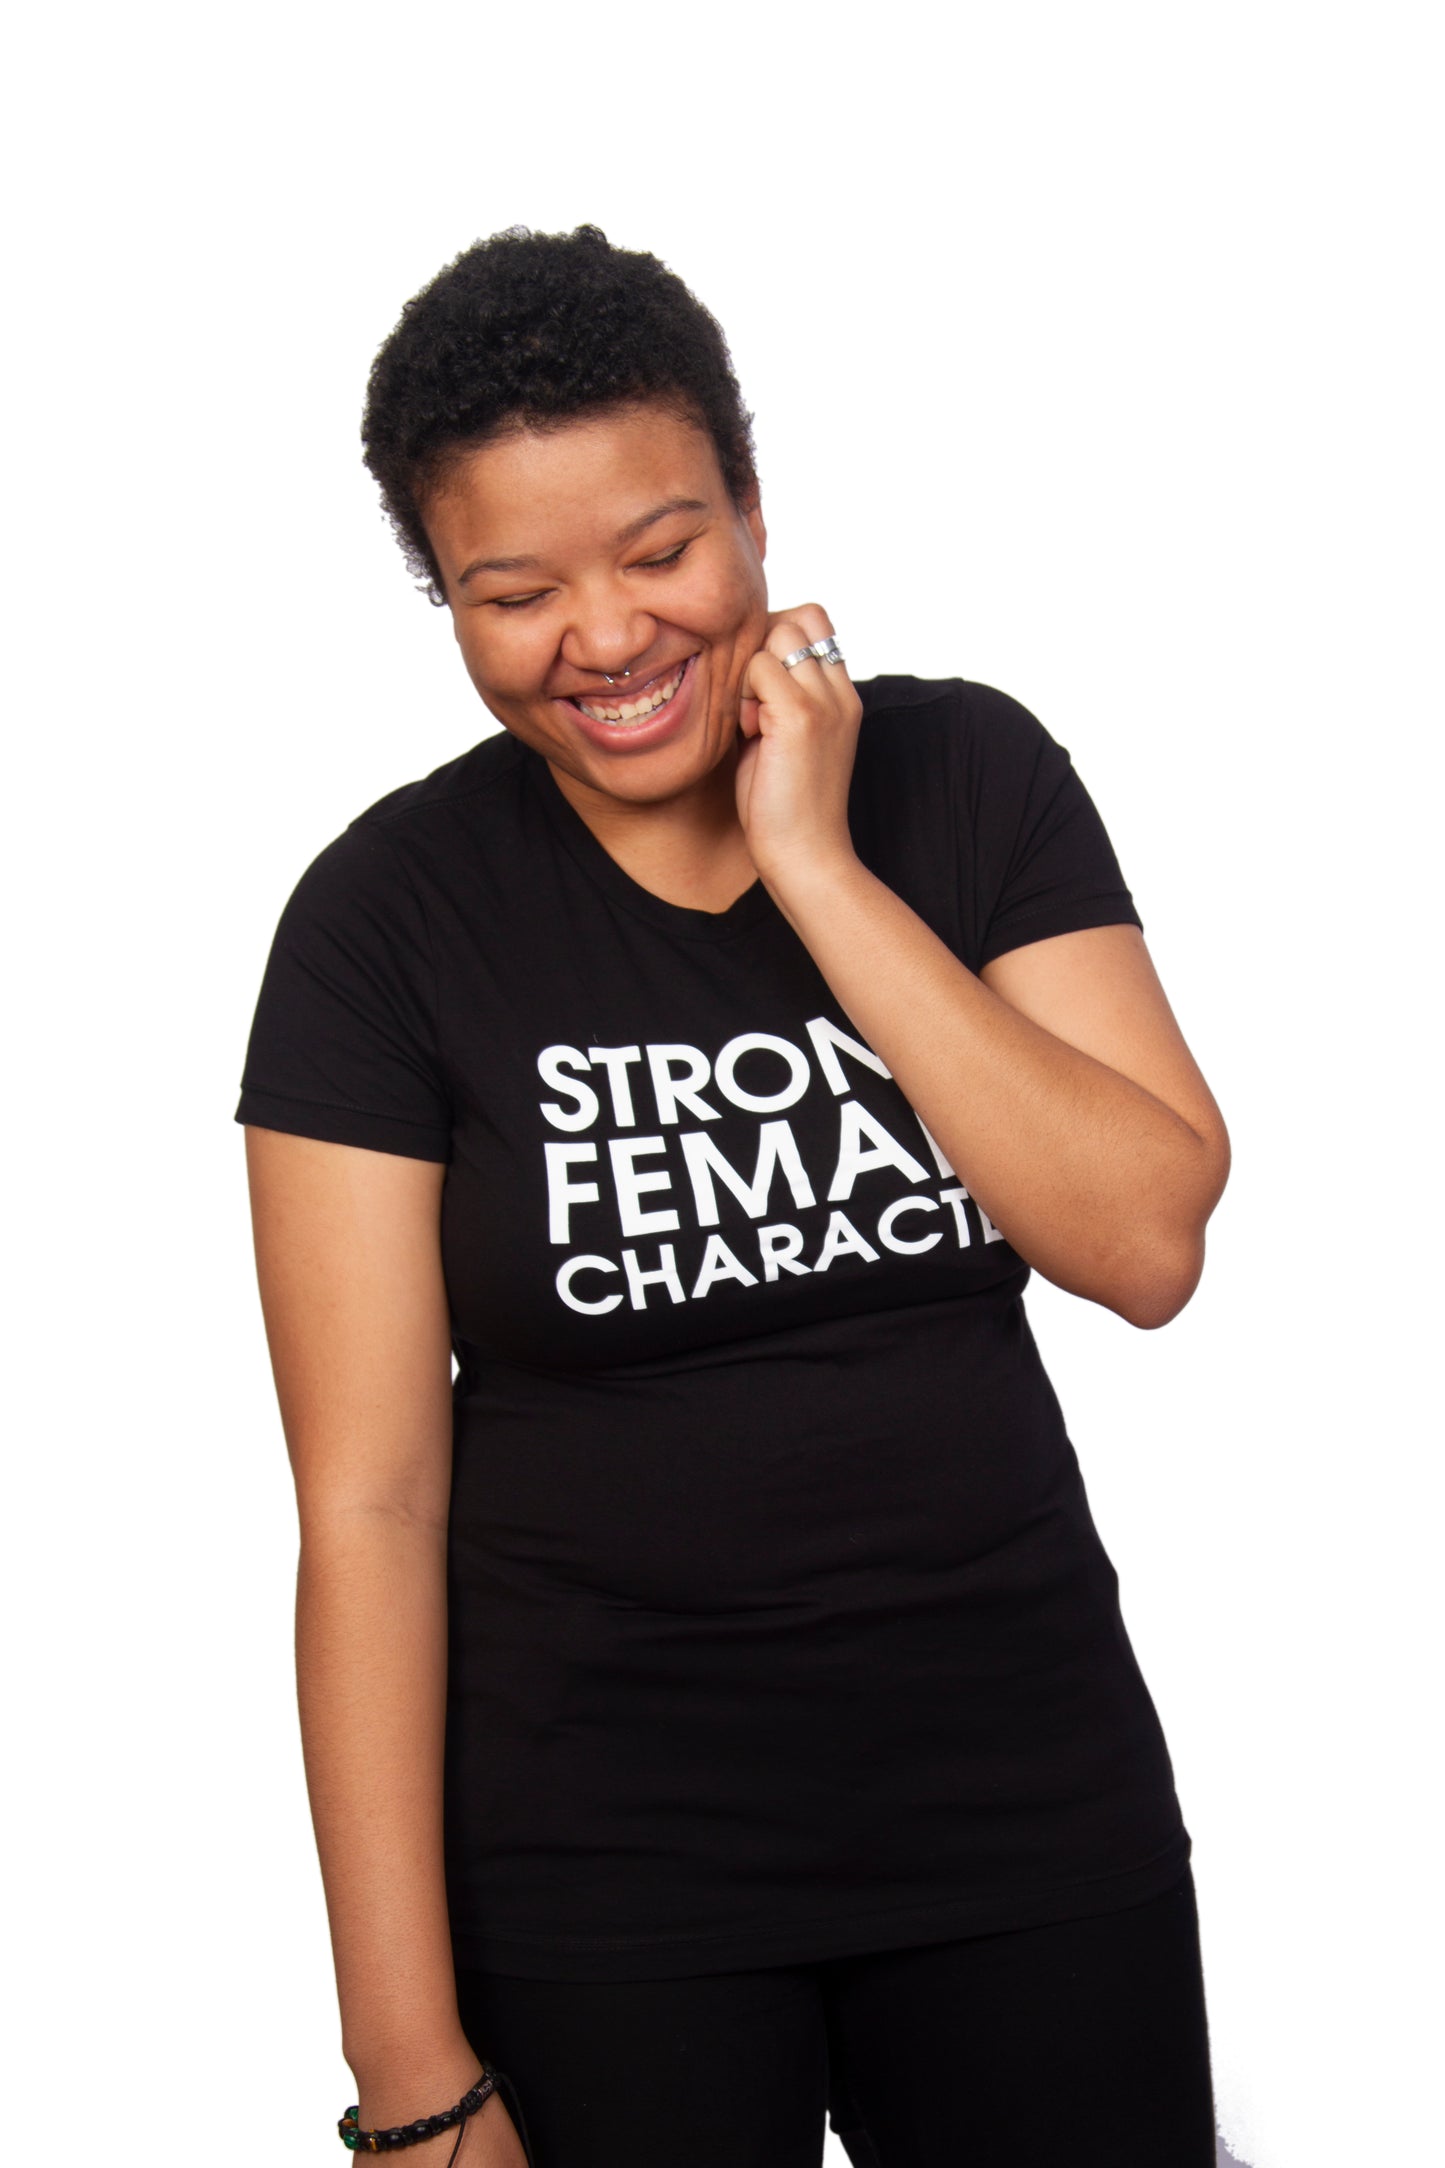 Strong Female Character Black T-shirt - Fitted Cut